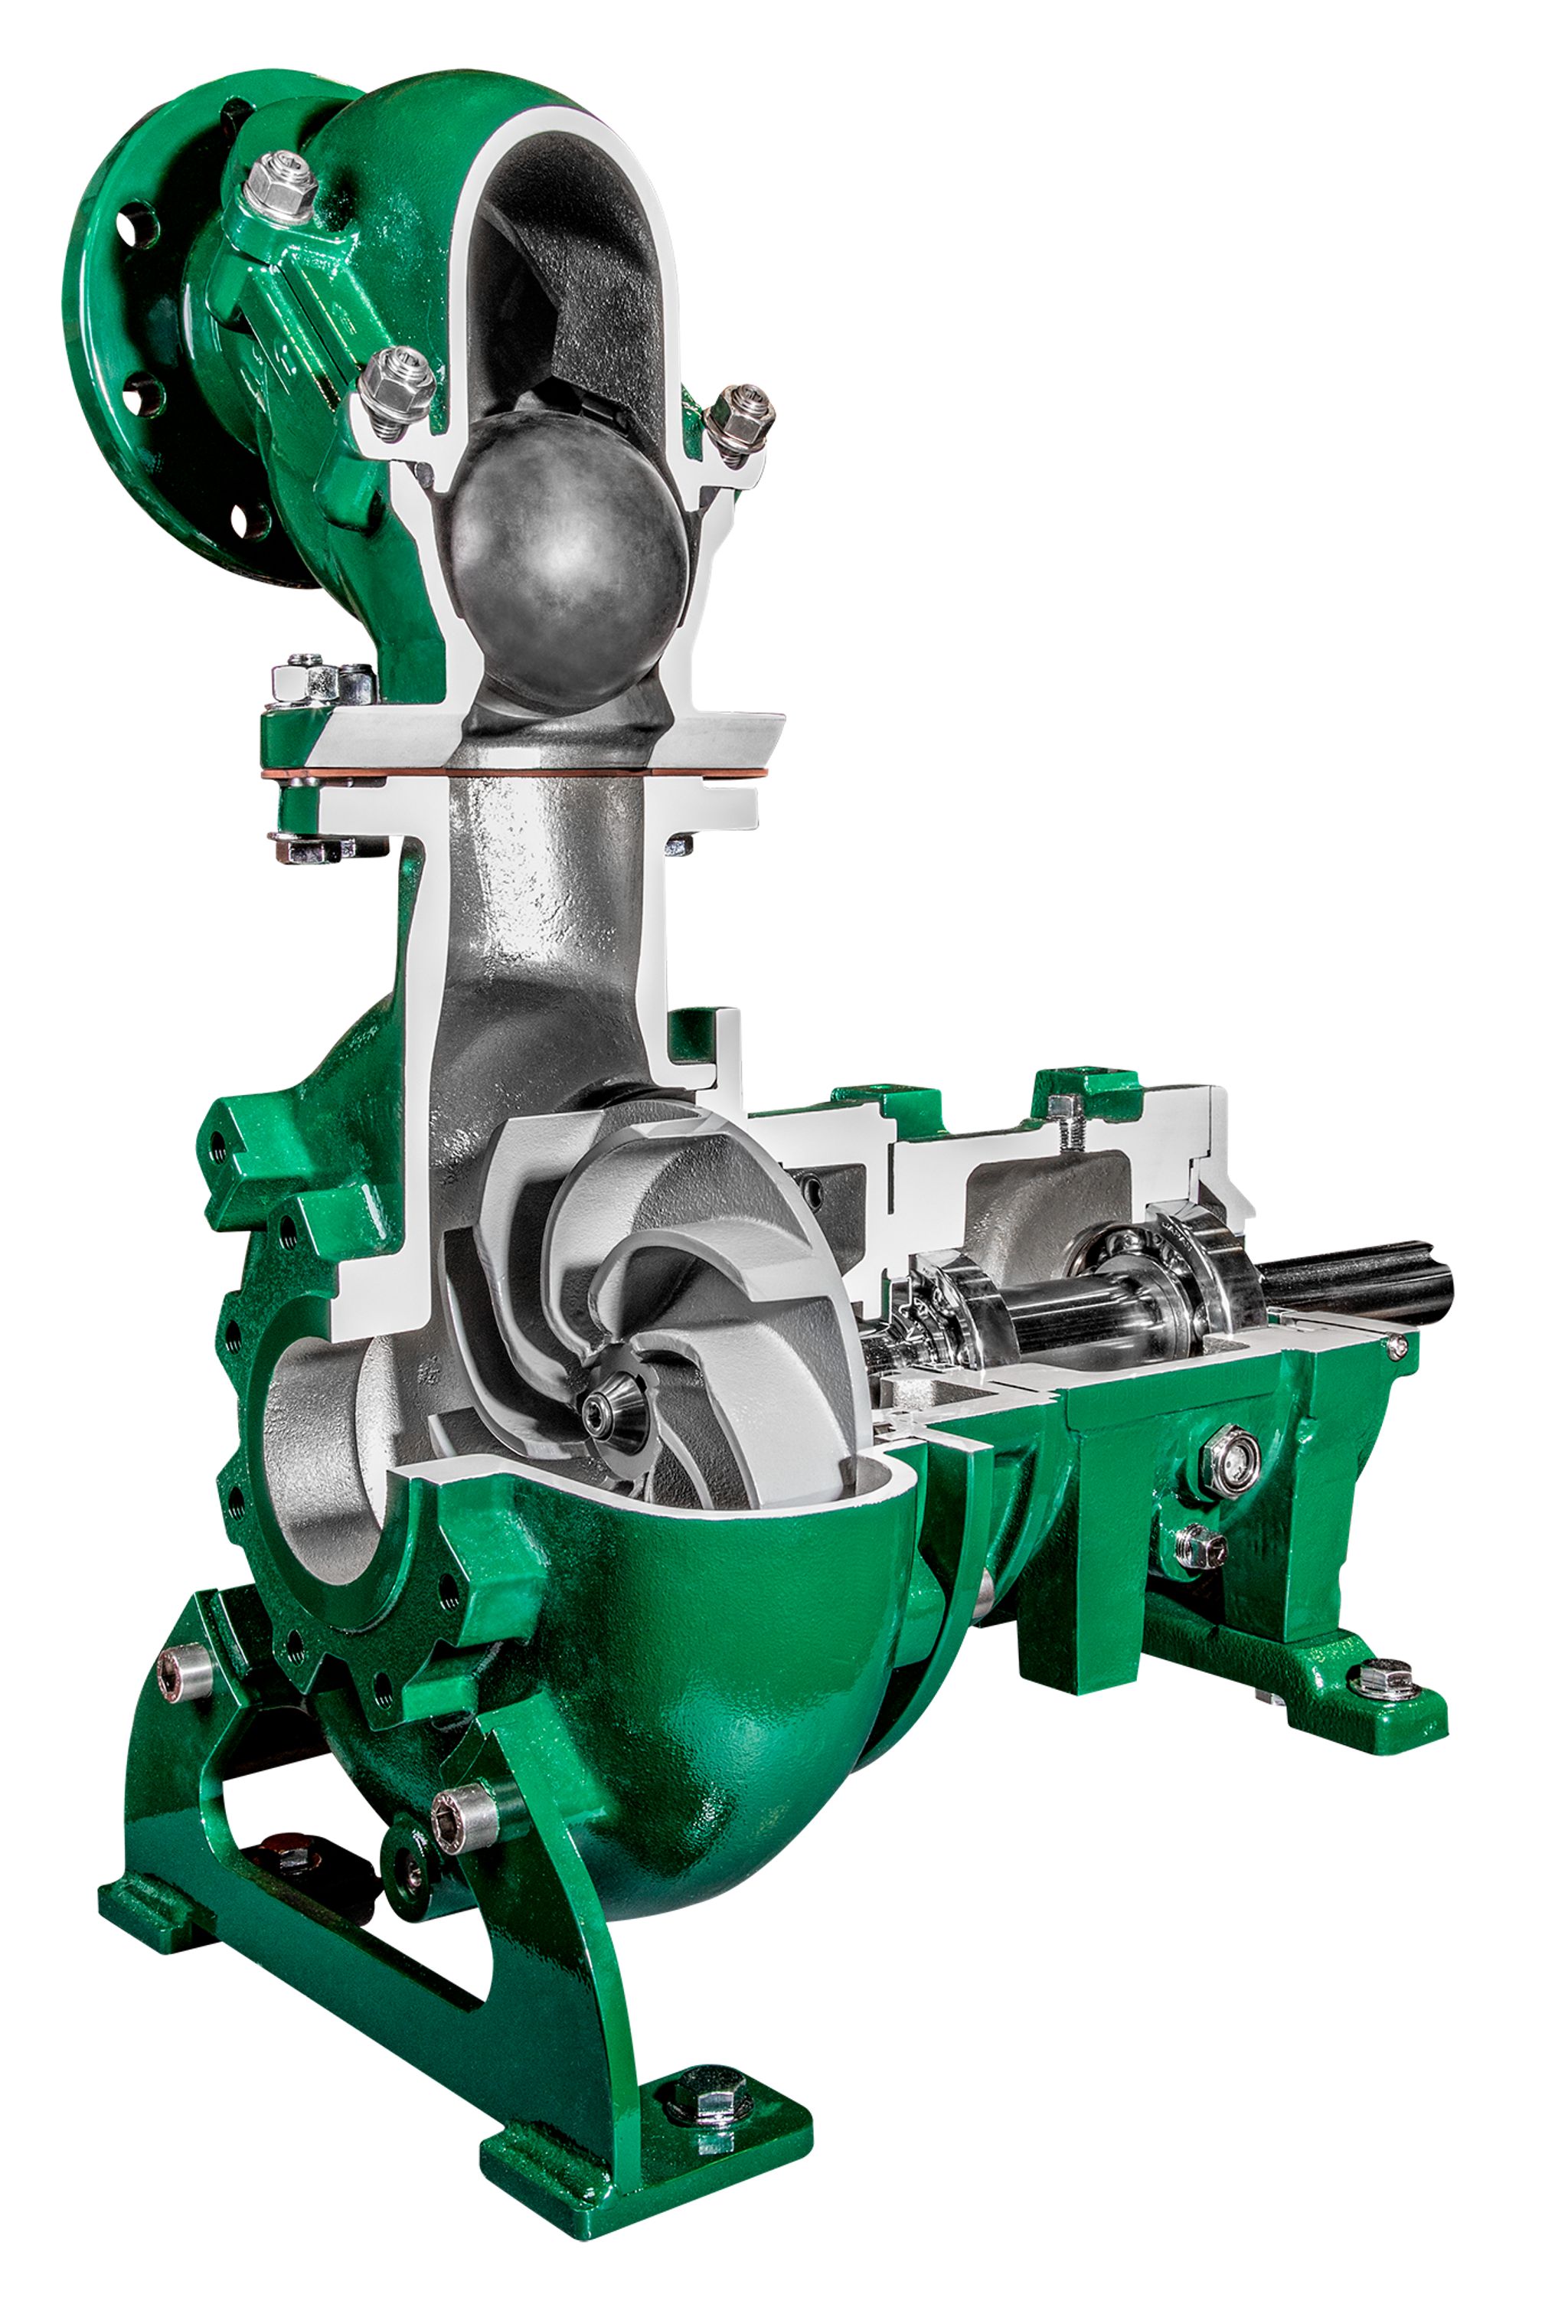 Franklin Electric's Pioneer Pump Vortex Series pumps can deal with challenging solids using vortex technology.